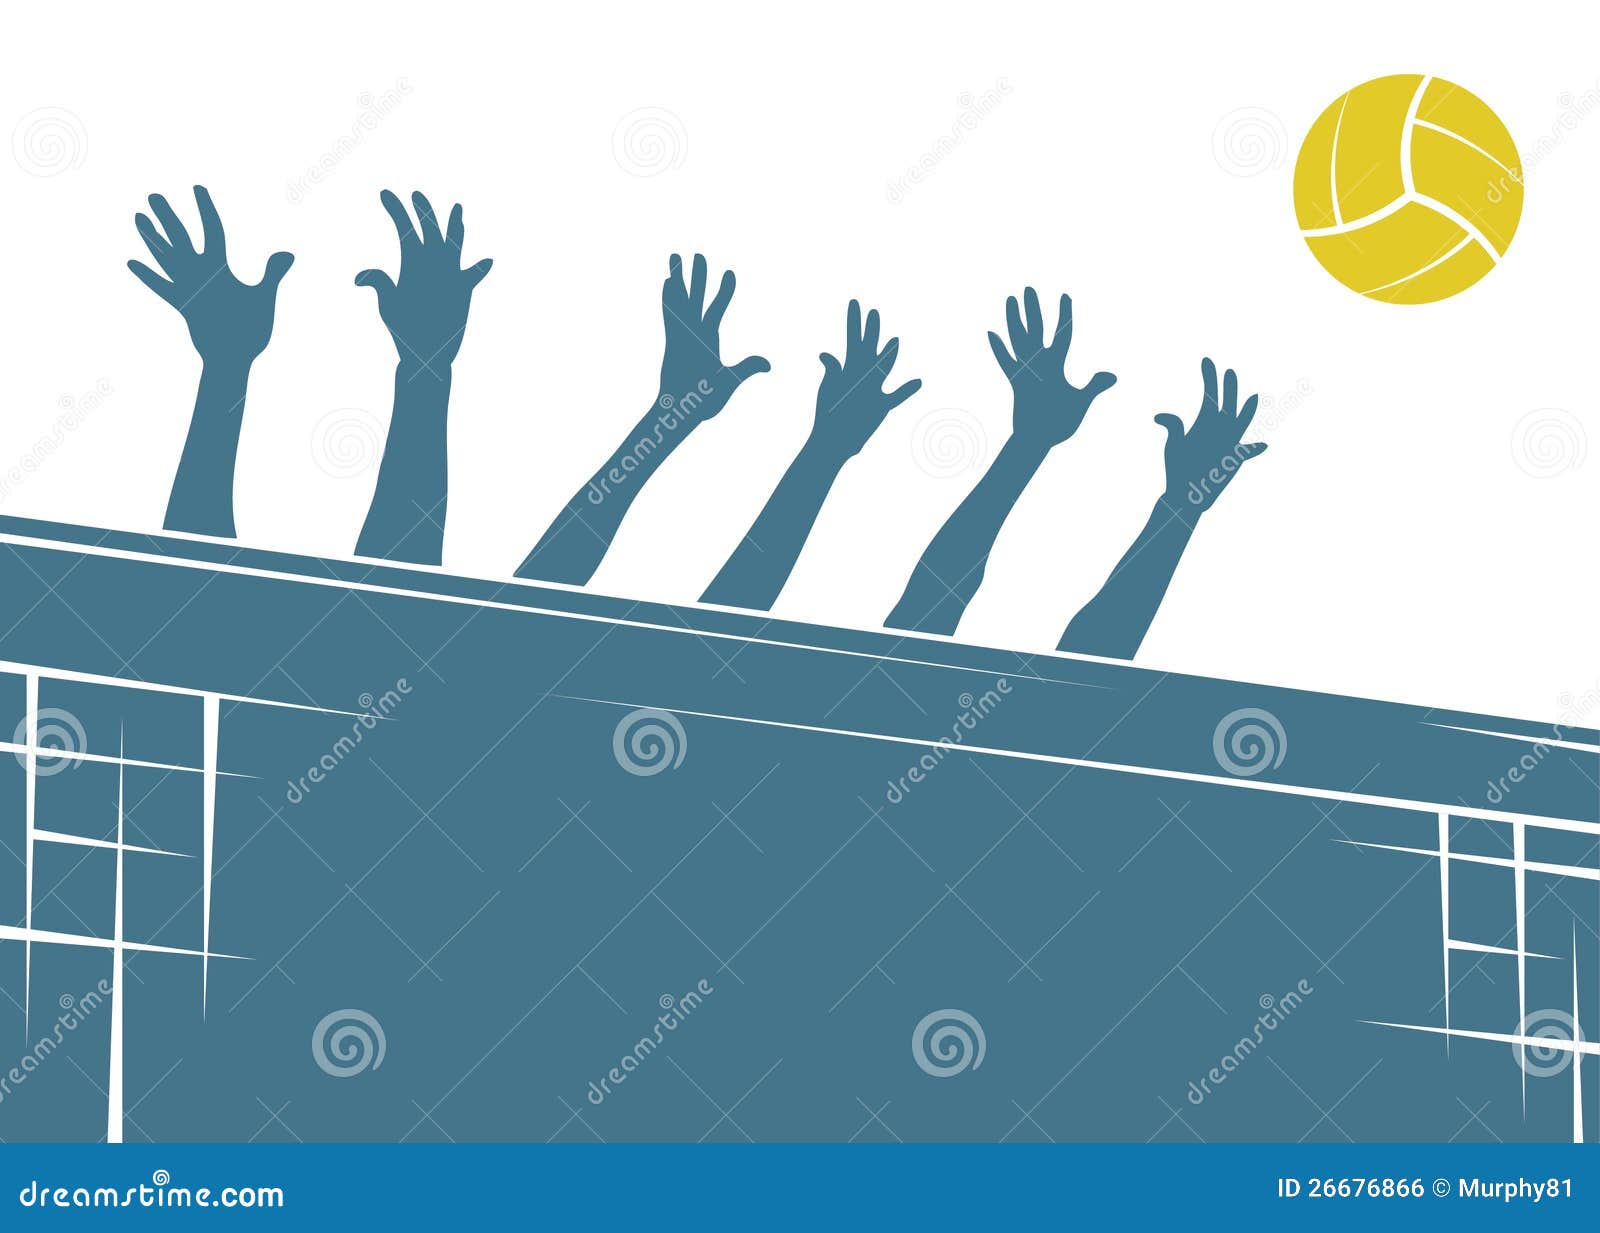 volleyball clipart with no background - photo #44